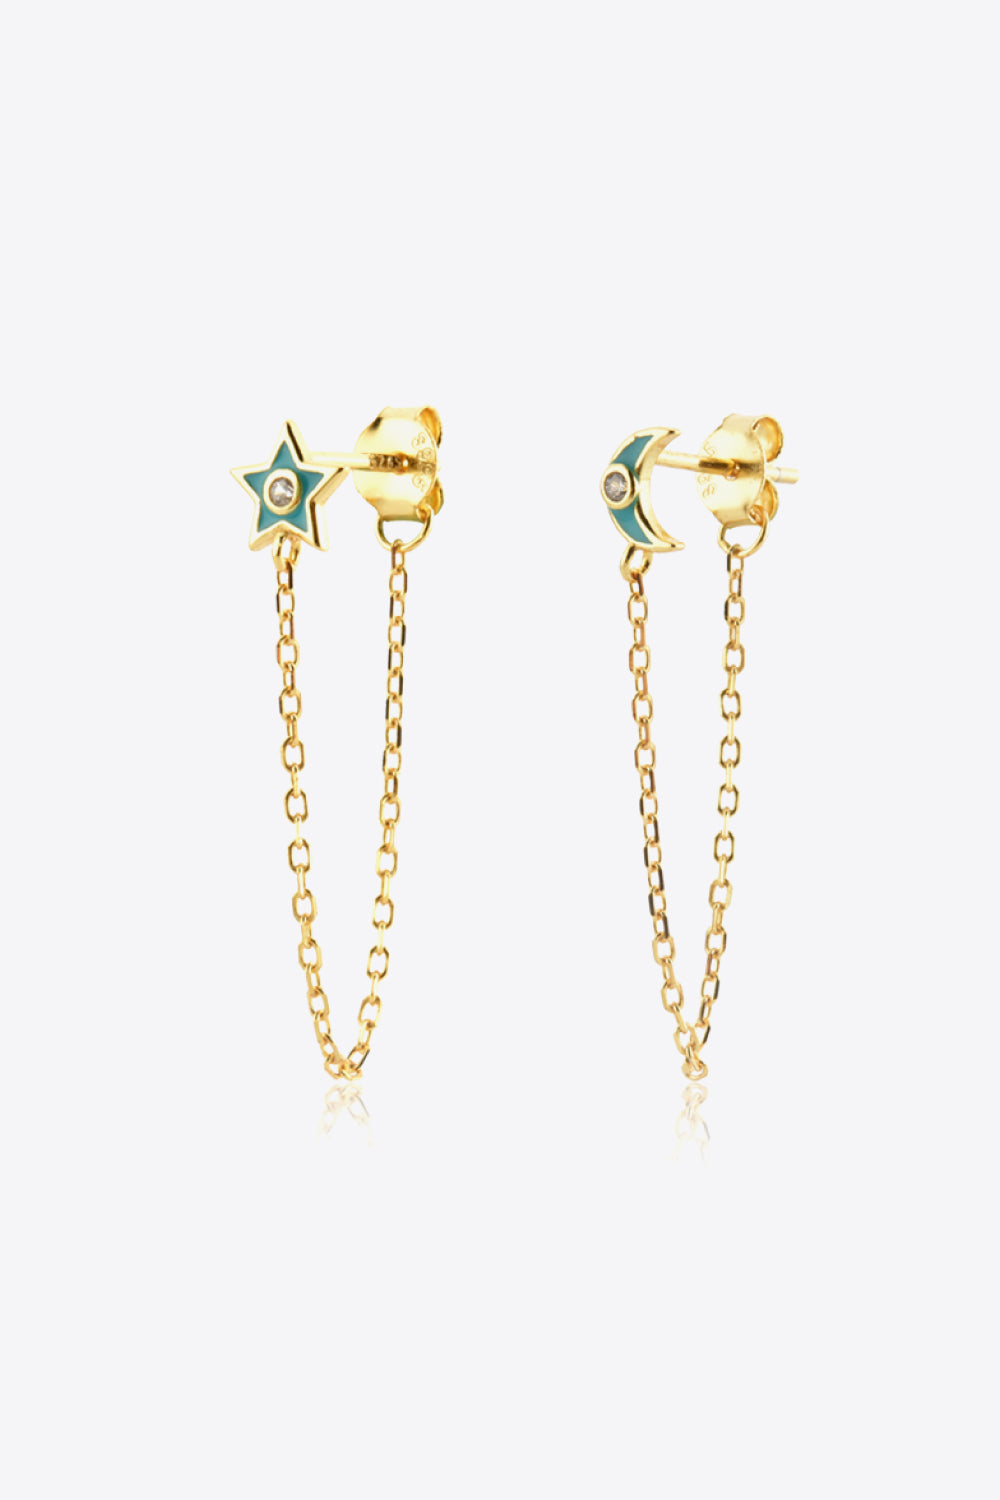 Zircon Star and Moon Mismatched Earrings